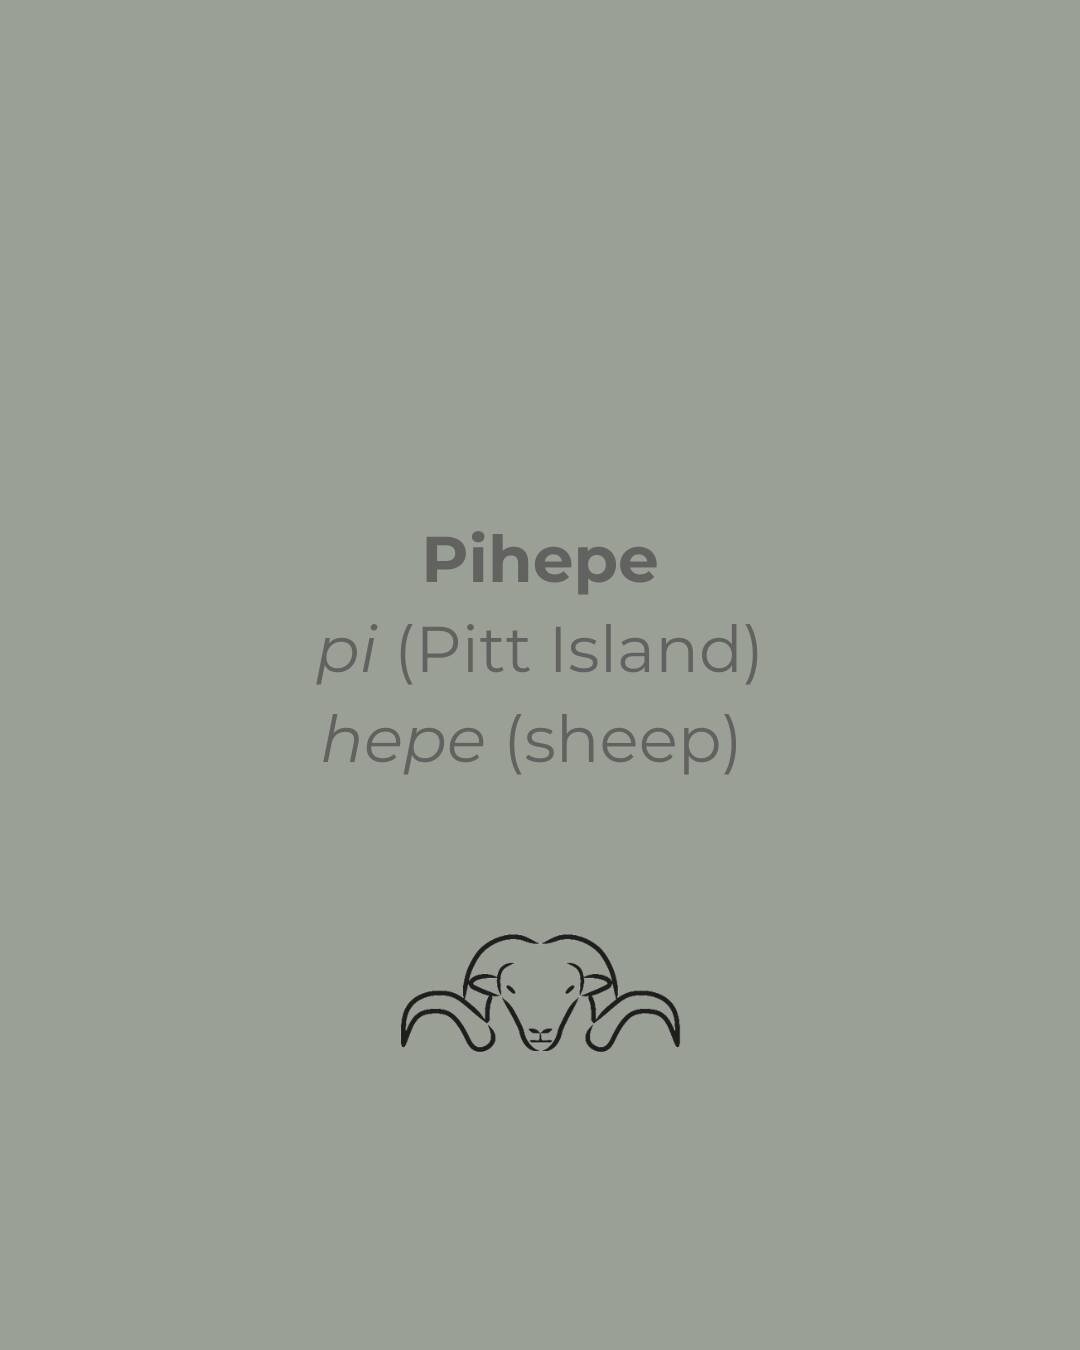 Our Pihepe (Pitt Island Wild Sheep) are farmed on Banks Peninsula, Canterbury. 
They originate from Saxony Merinos. They were sent to Pitt Island in the Chatham Islands off the East coast of New Zealand in 1841 by Baron von Alsdorf. In 1843, Frederic